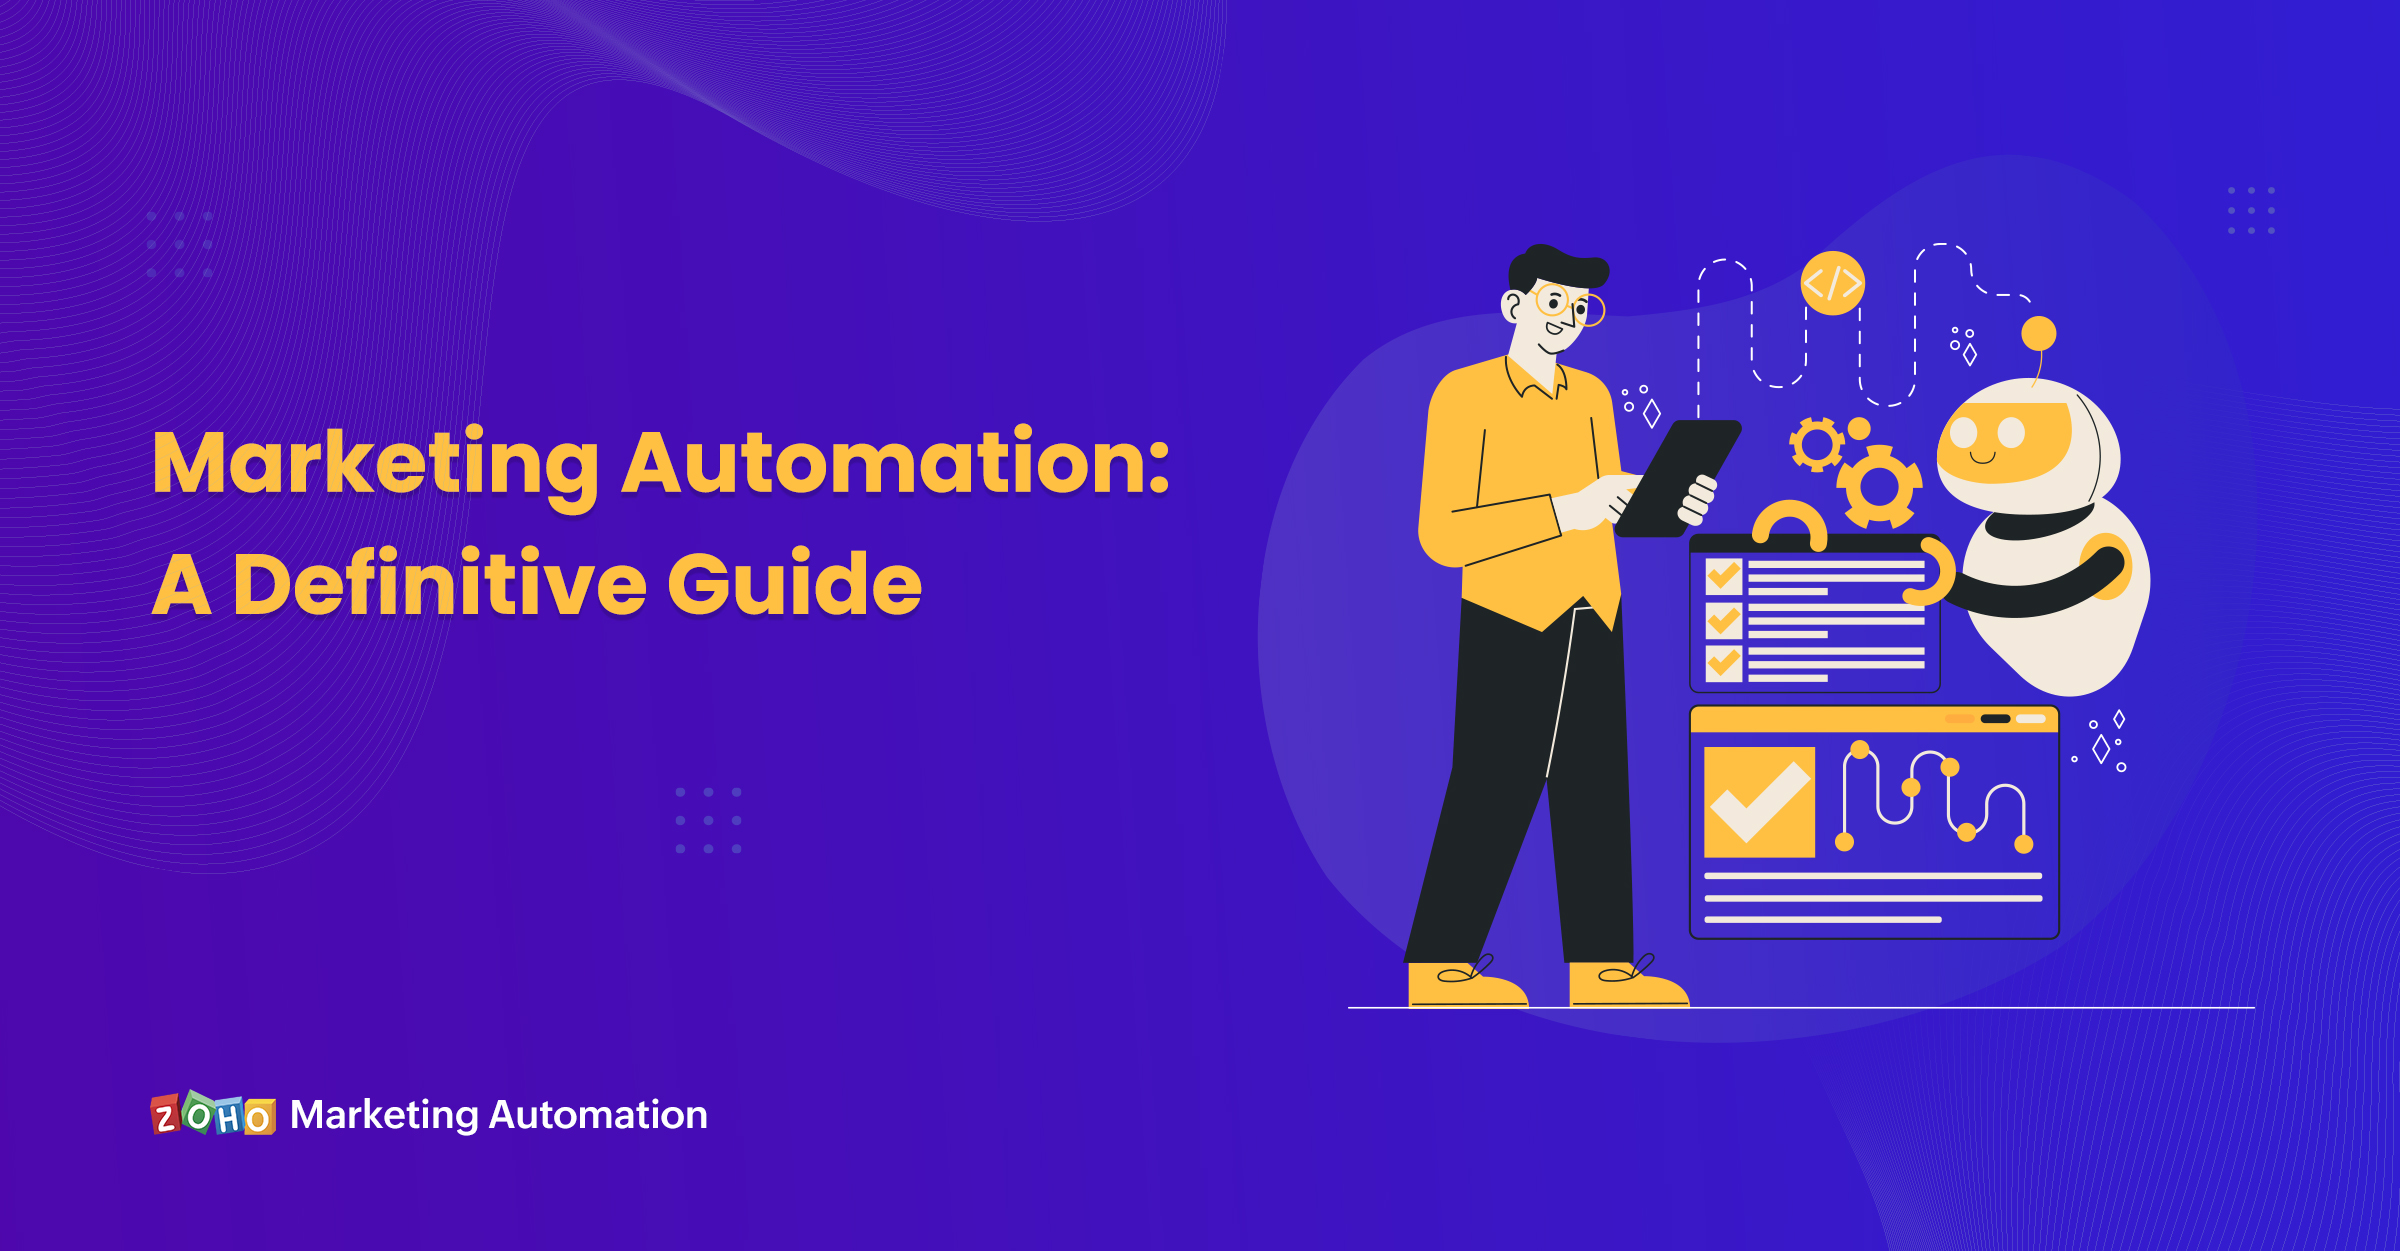 Marketing Automation: A definitive guide